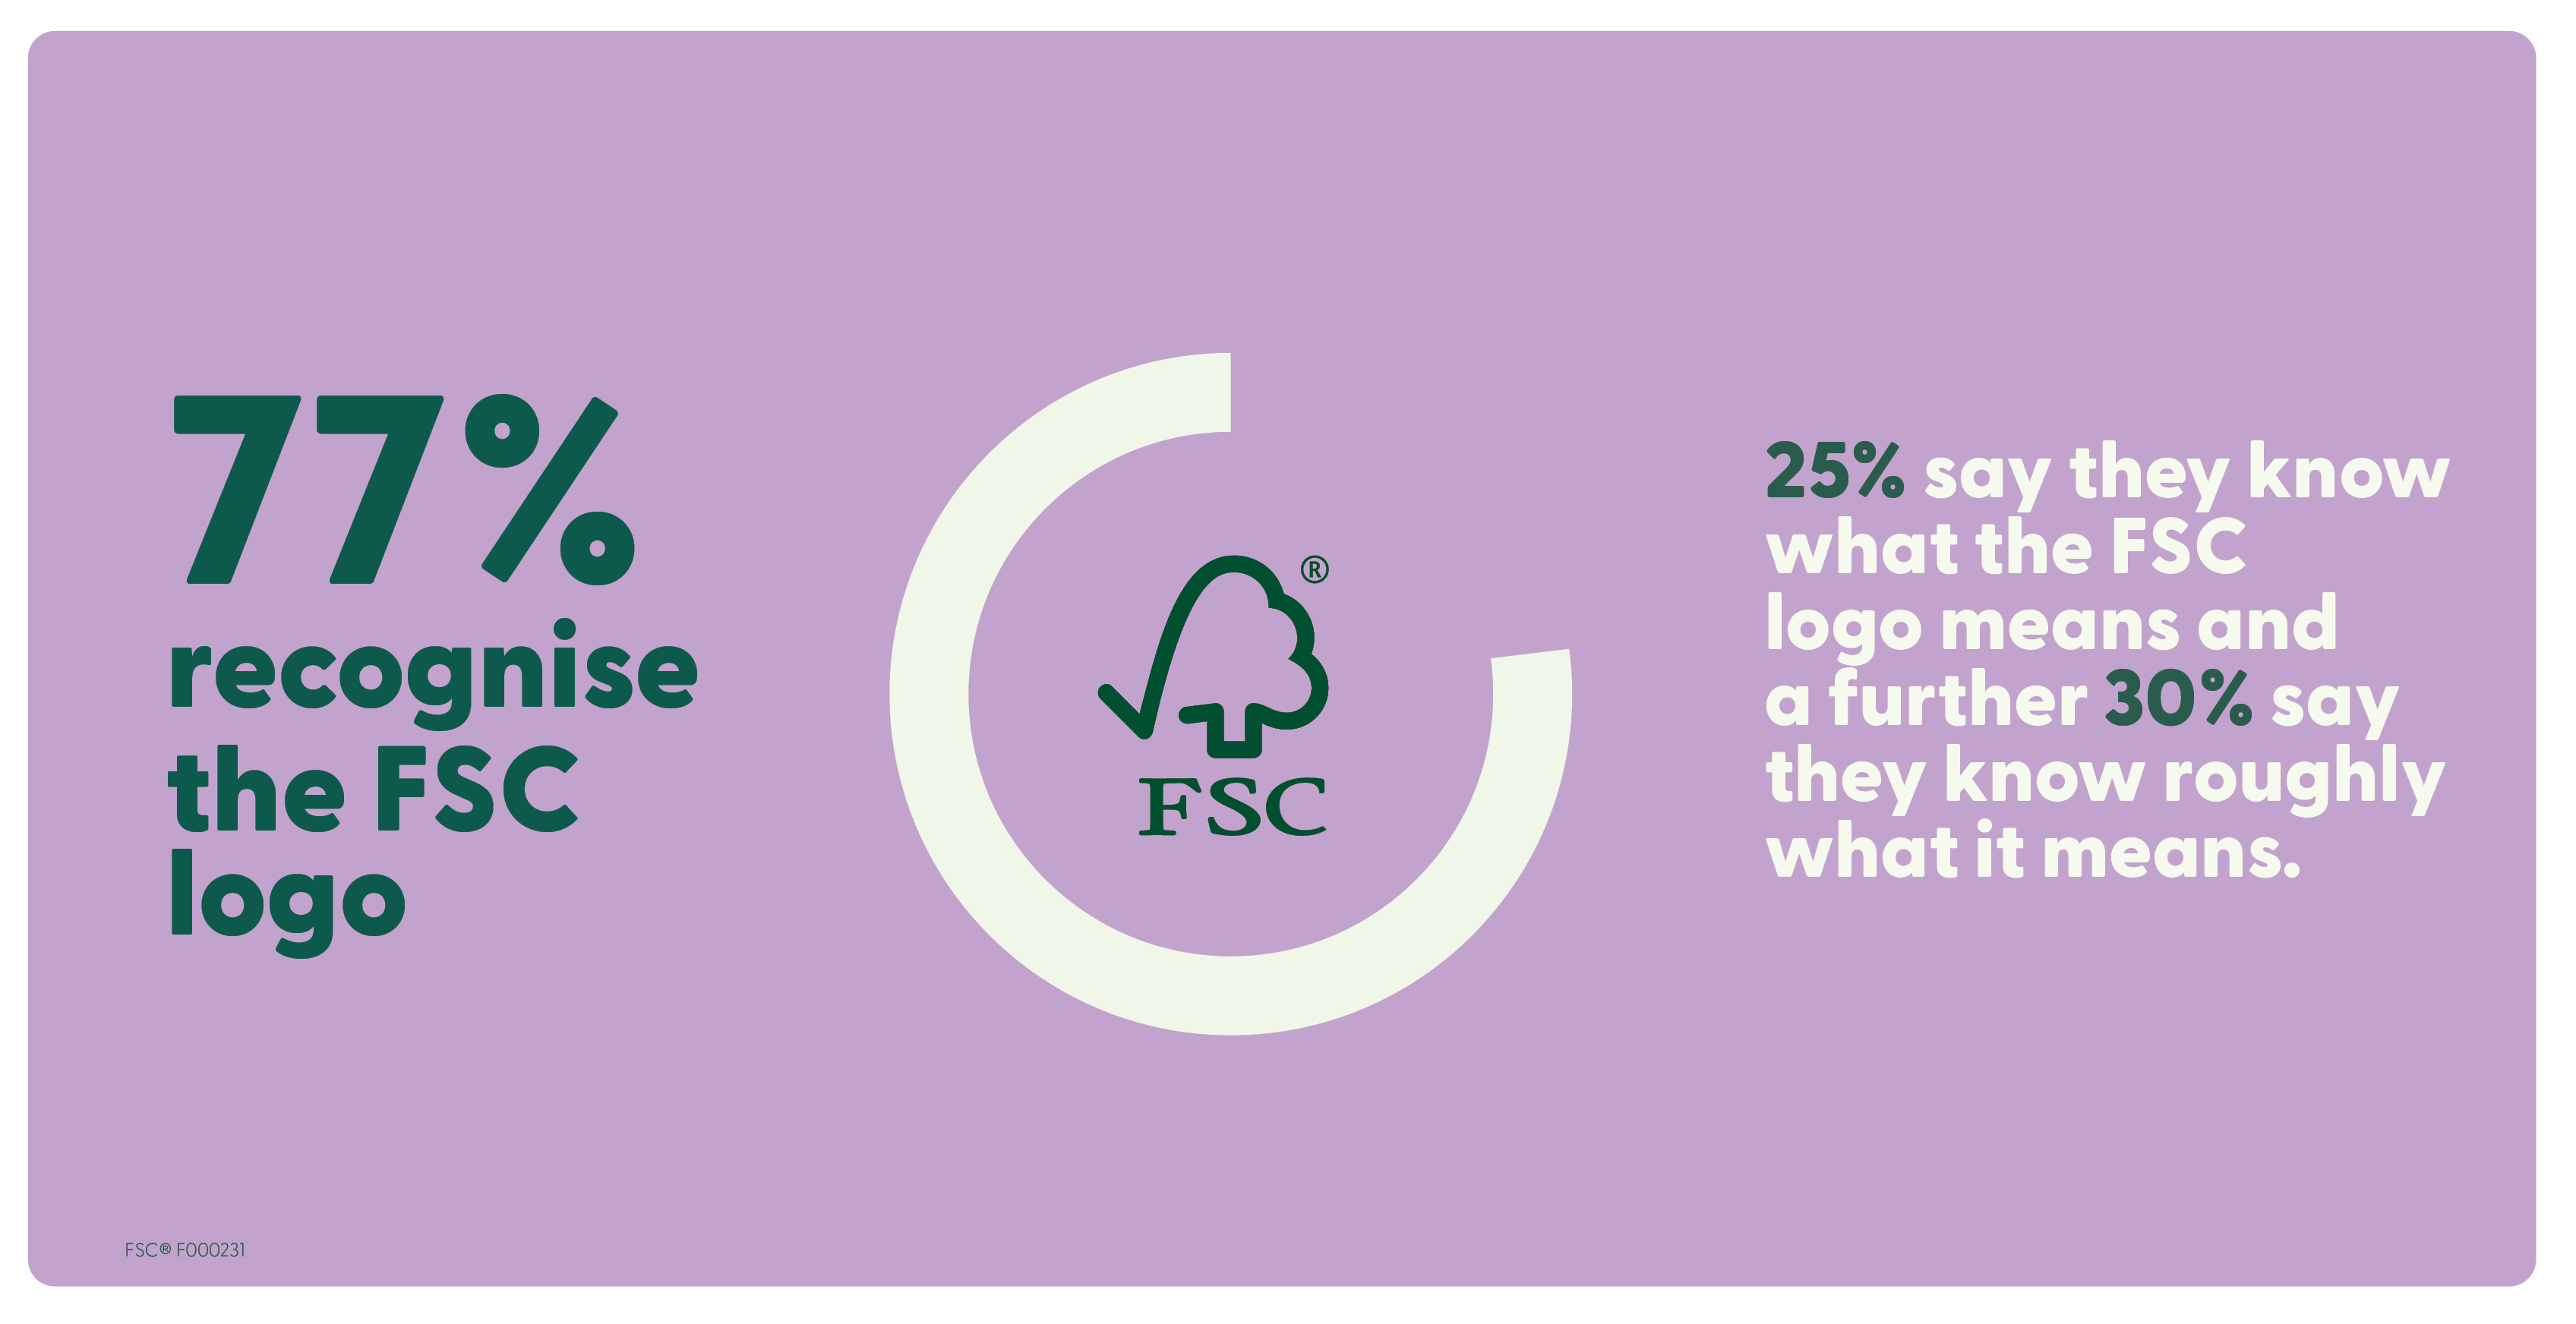 77% of people in the UK recognise the FSC logo